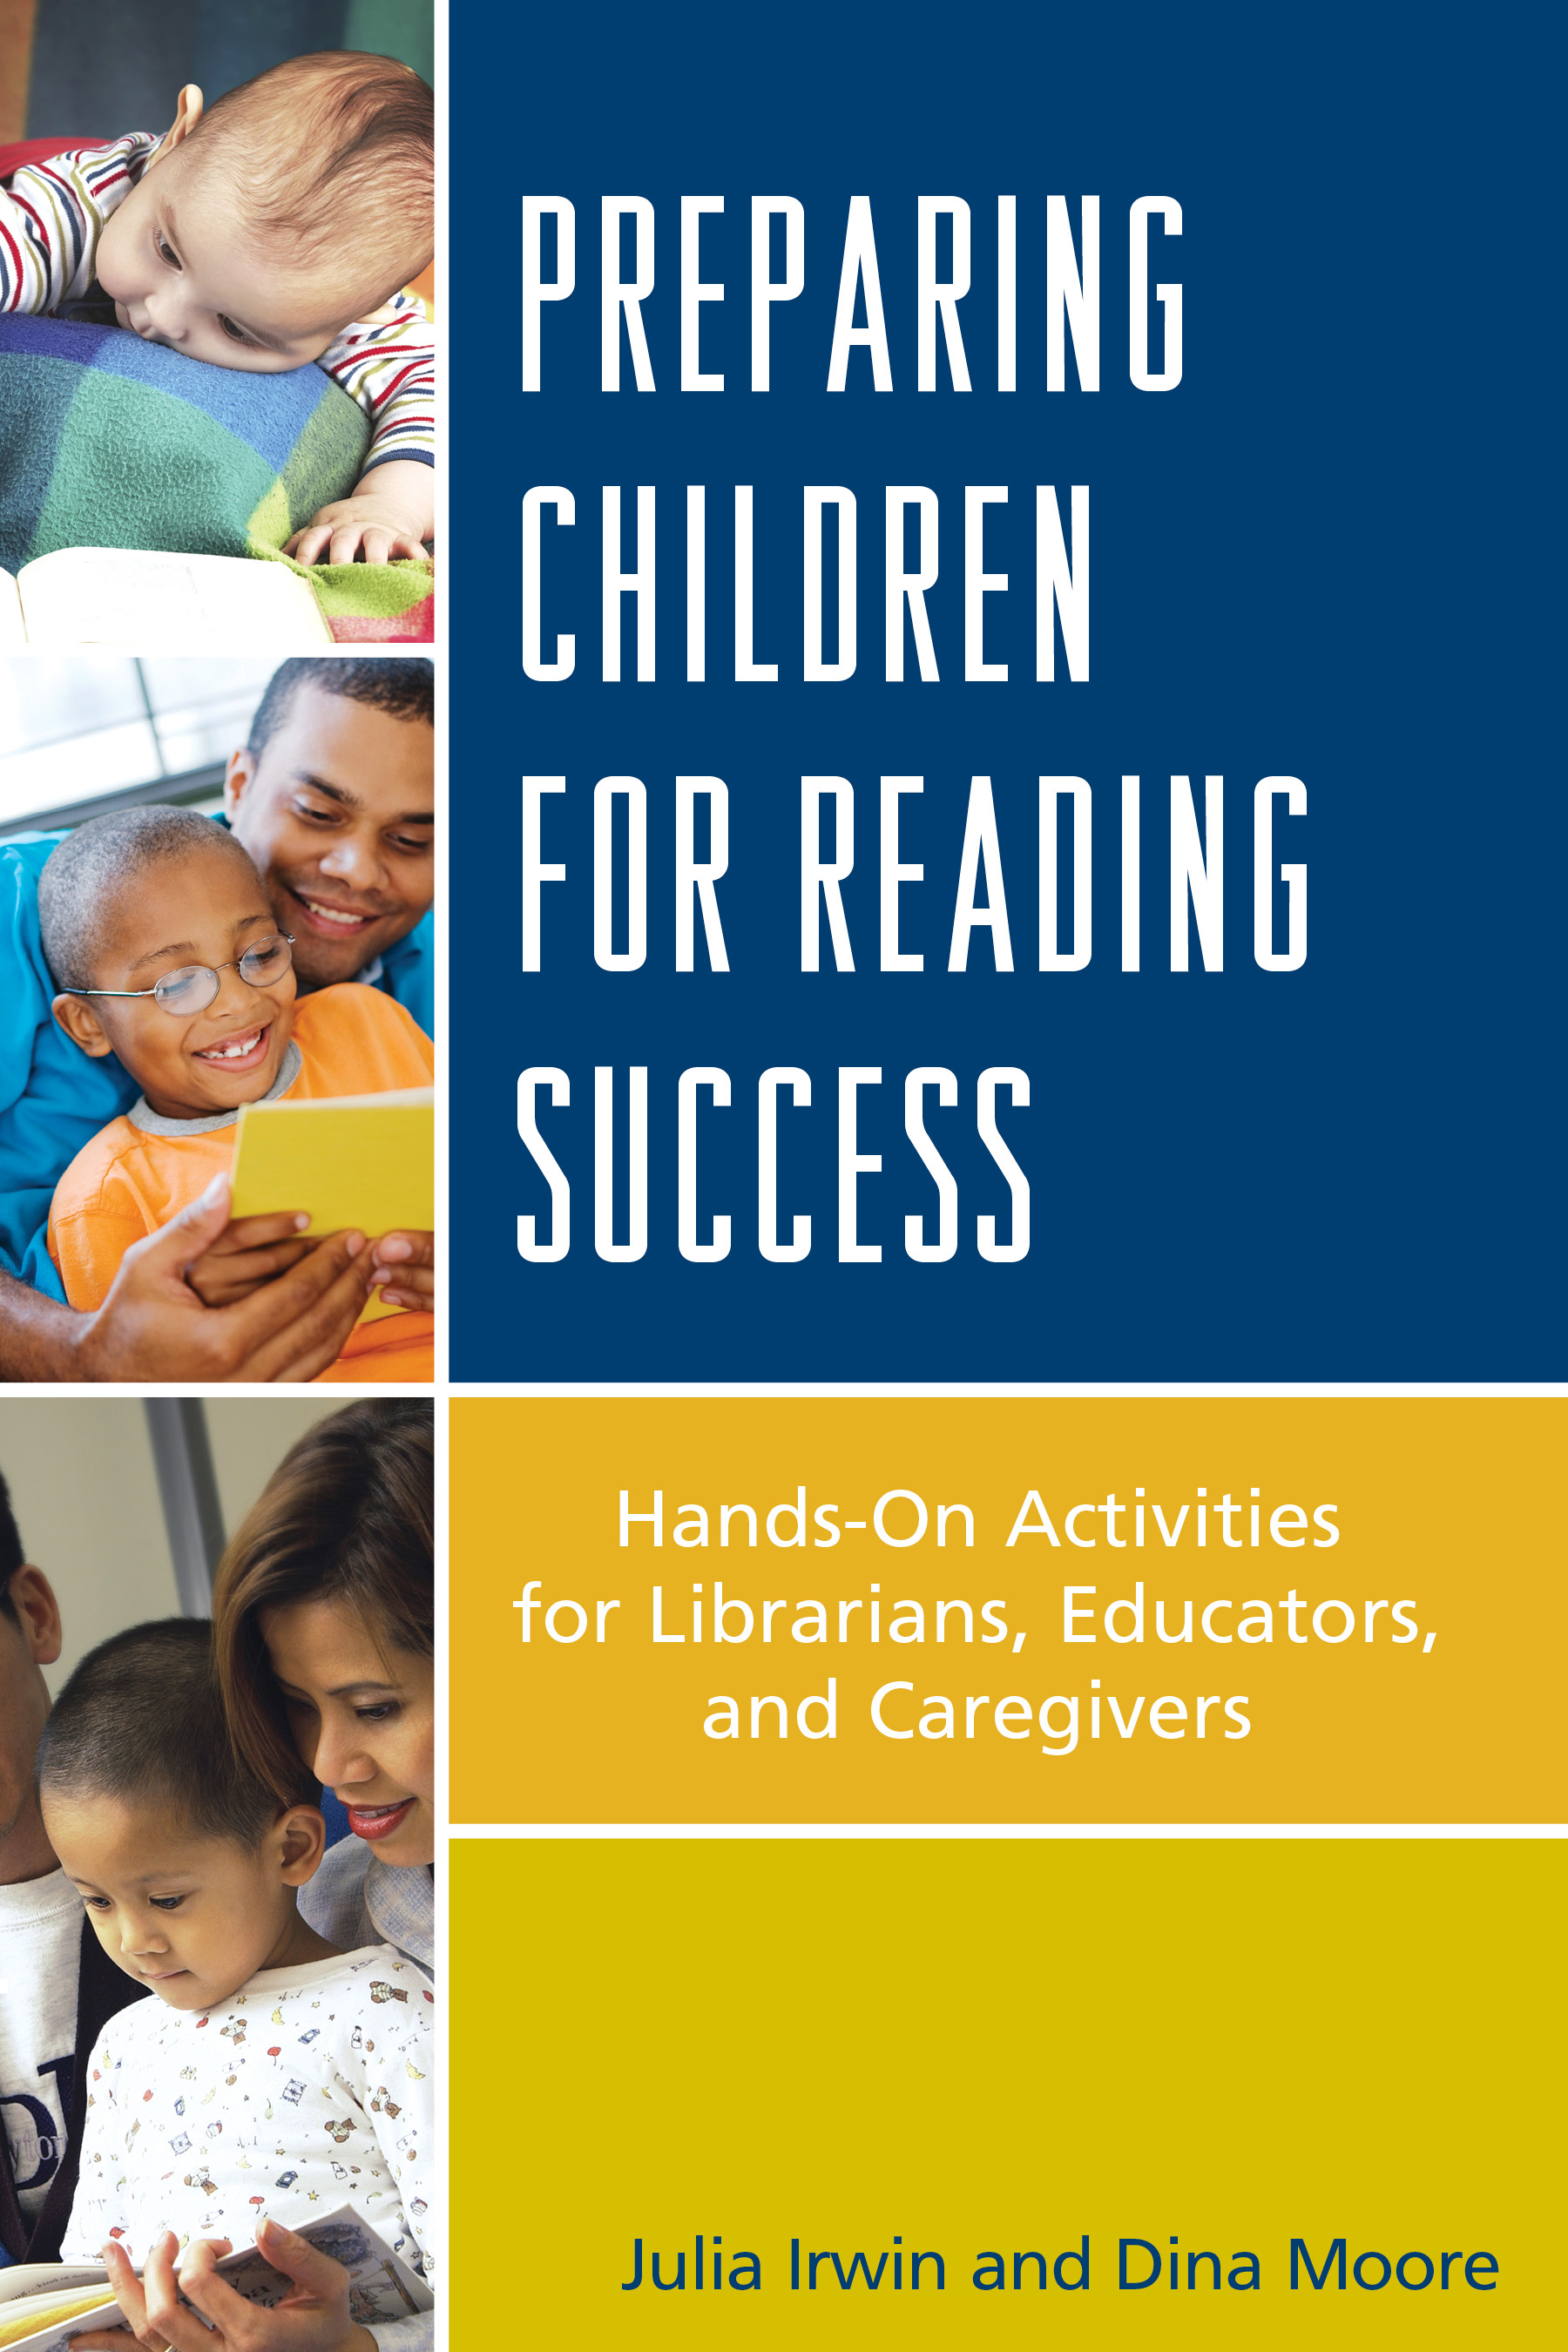 Preparing Children for Reading Success: Hands-On Activities for Librarians, Educators, and Caregivers